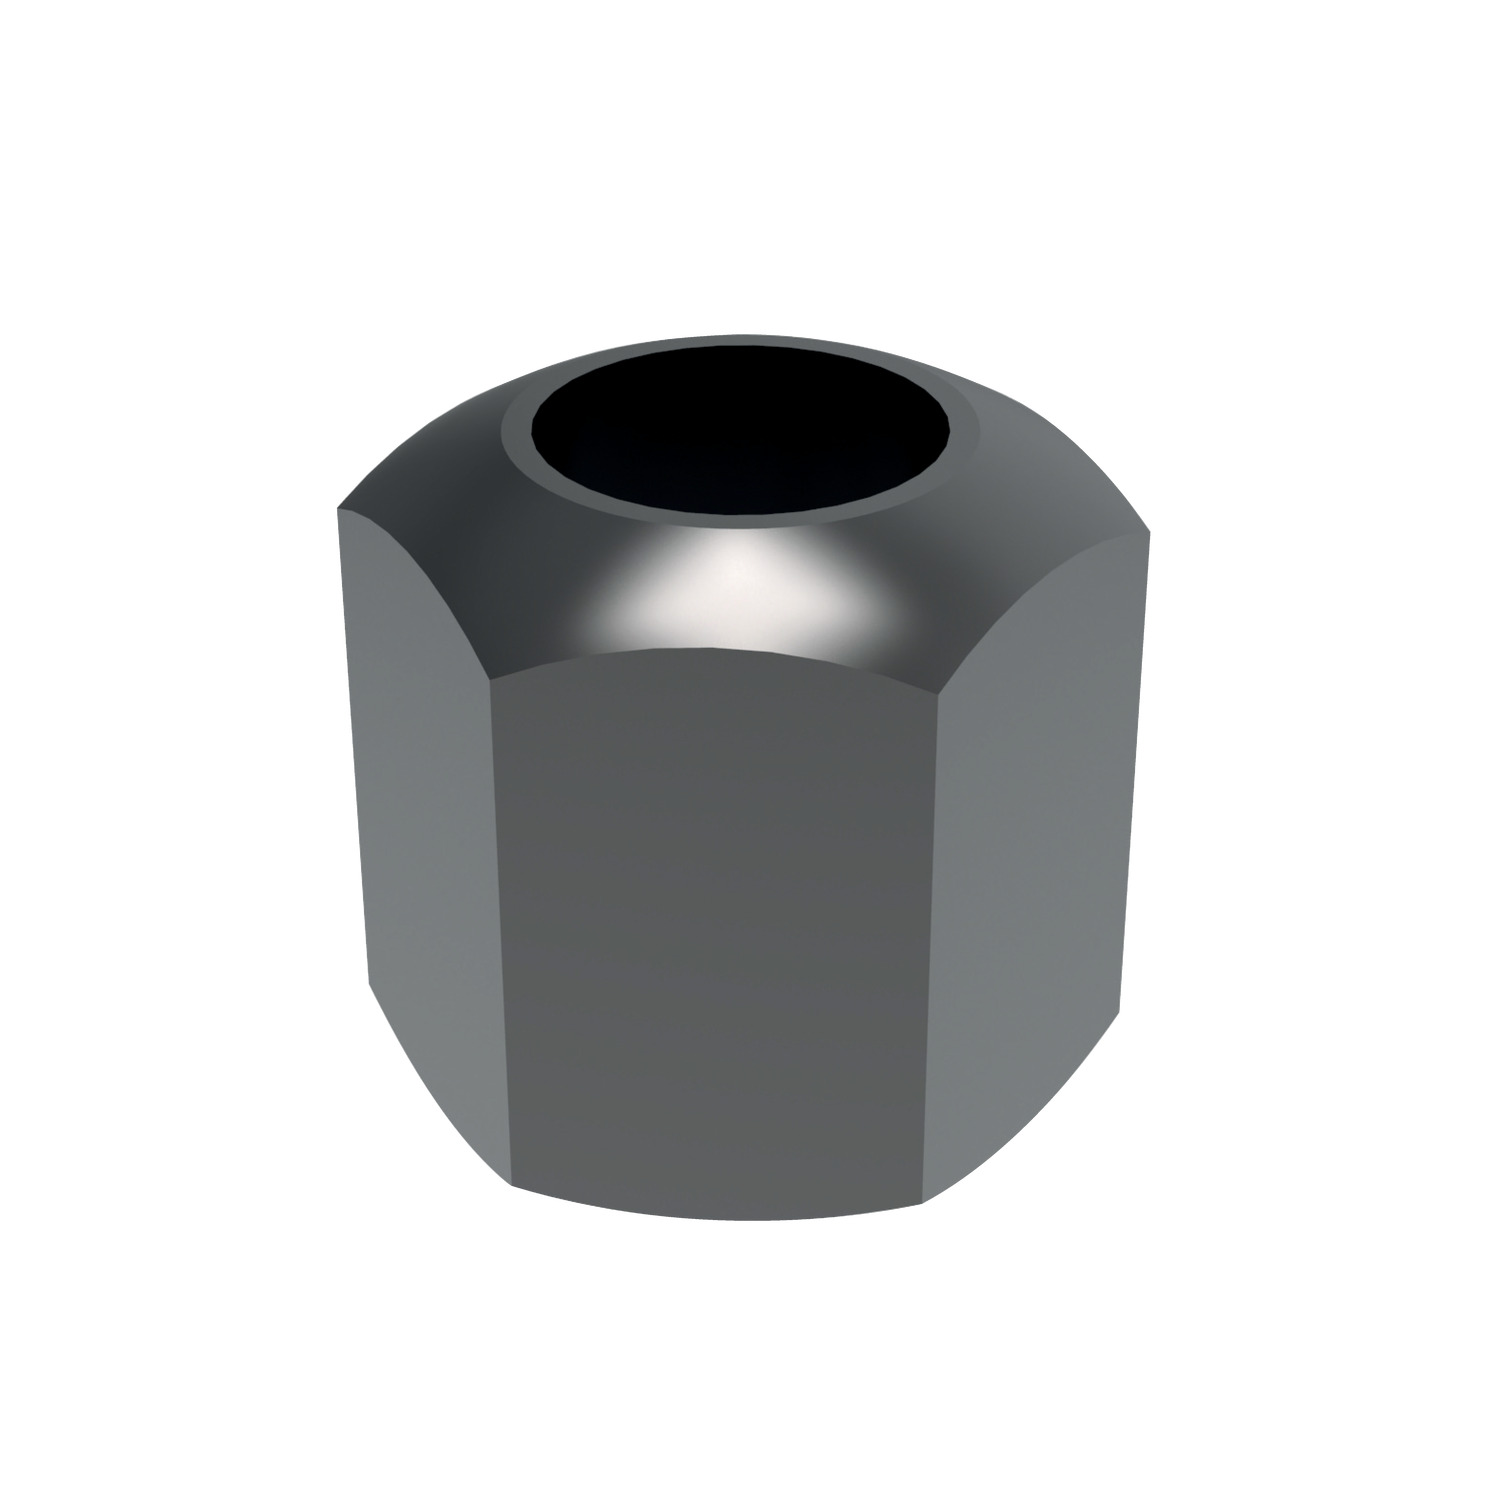 Fixture Nuts Made to DIN 6330B. Heat treated steel. Strength class 10.